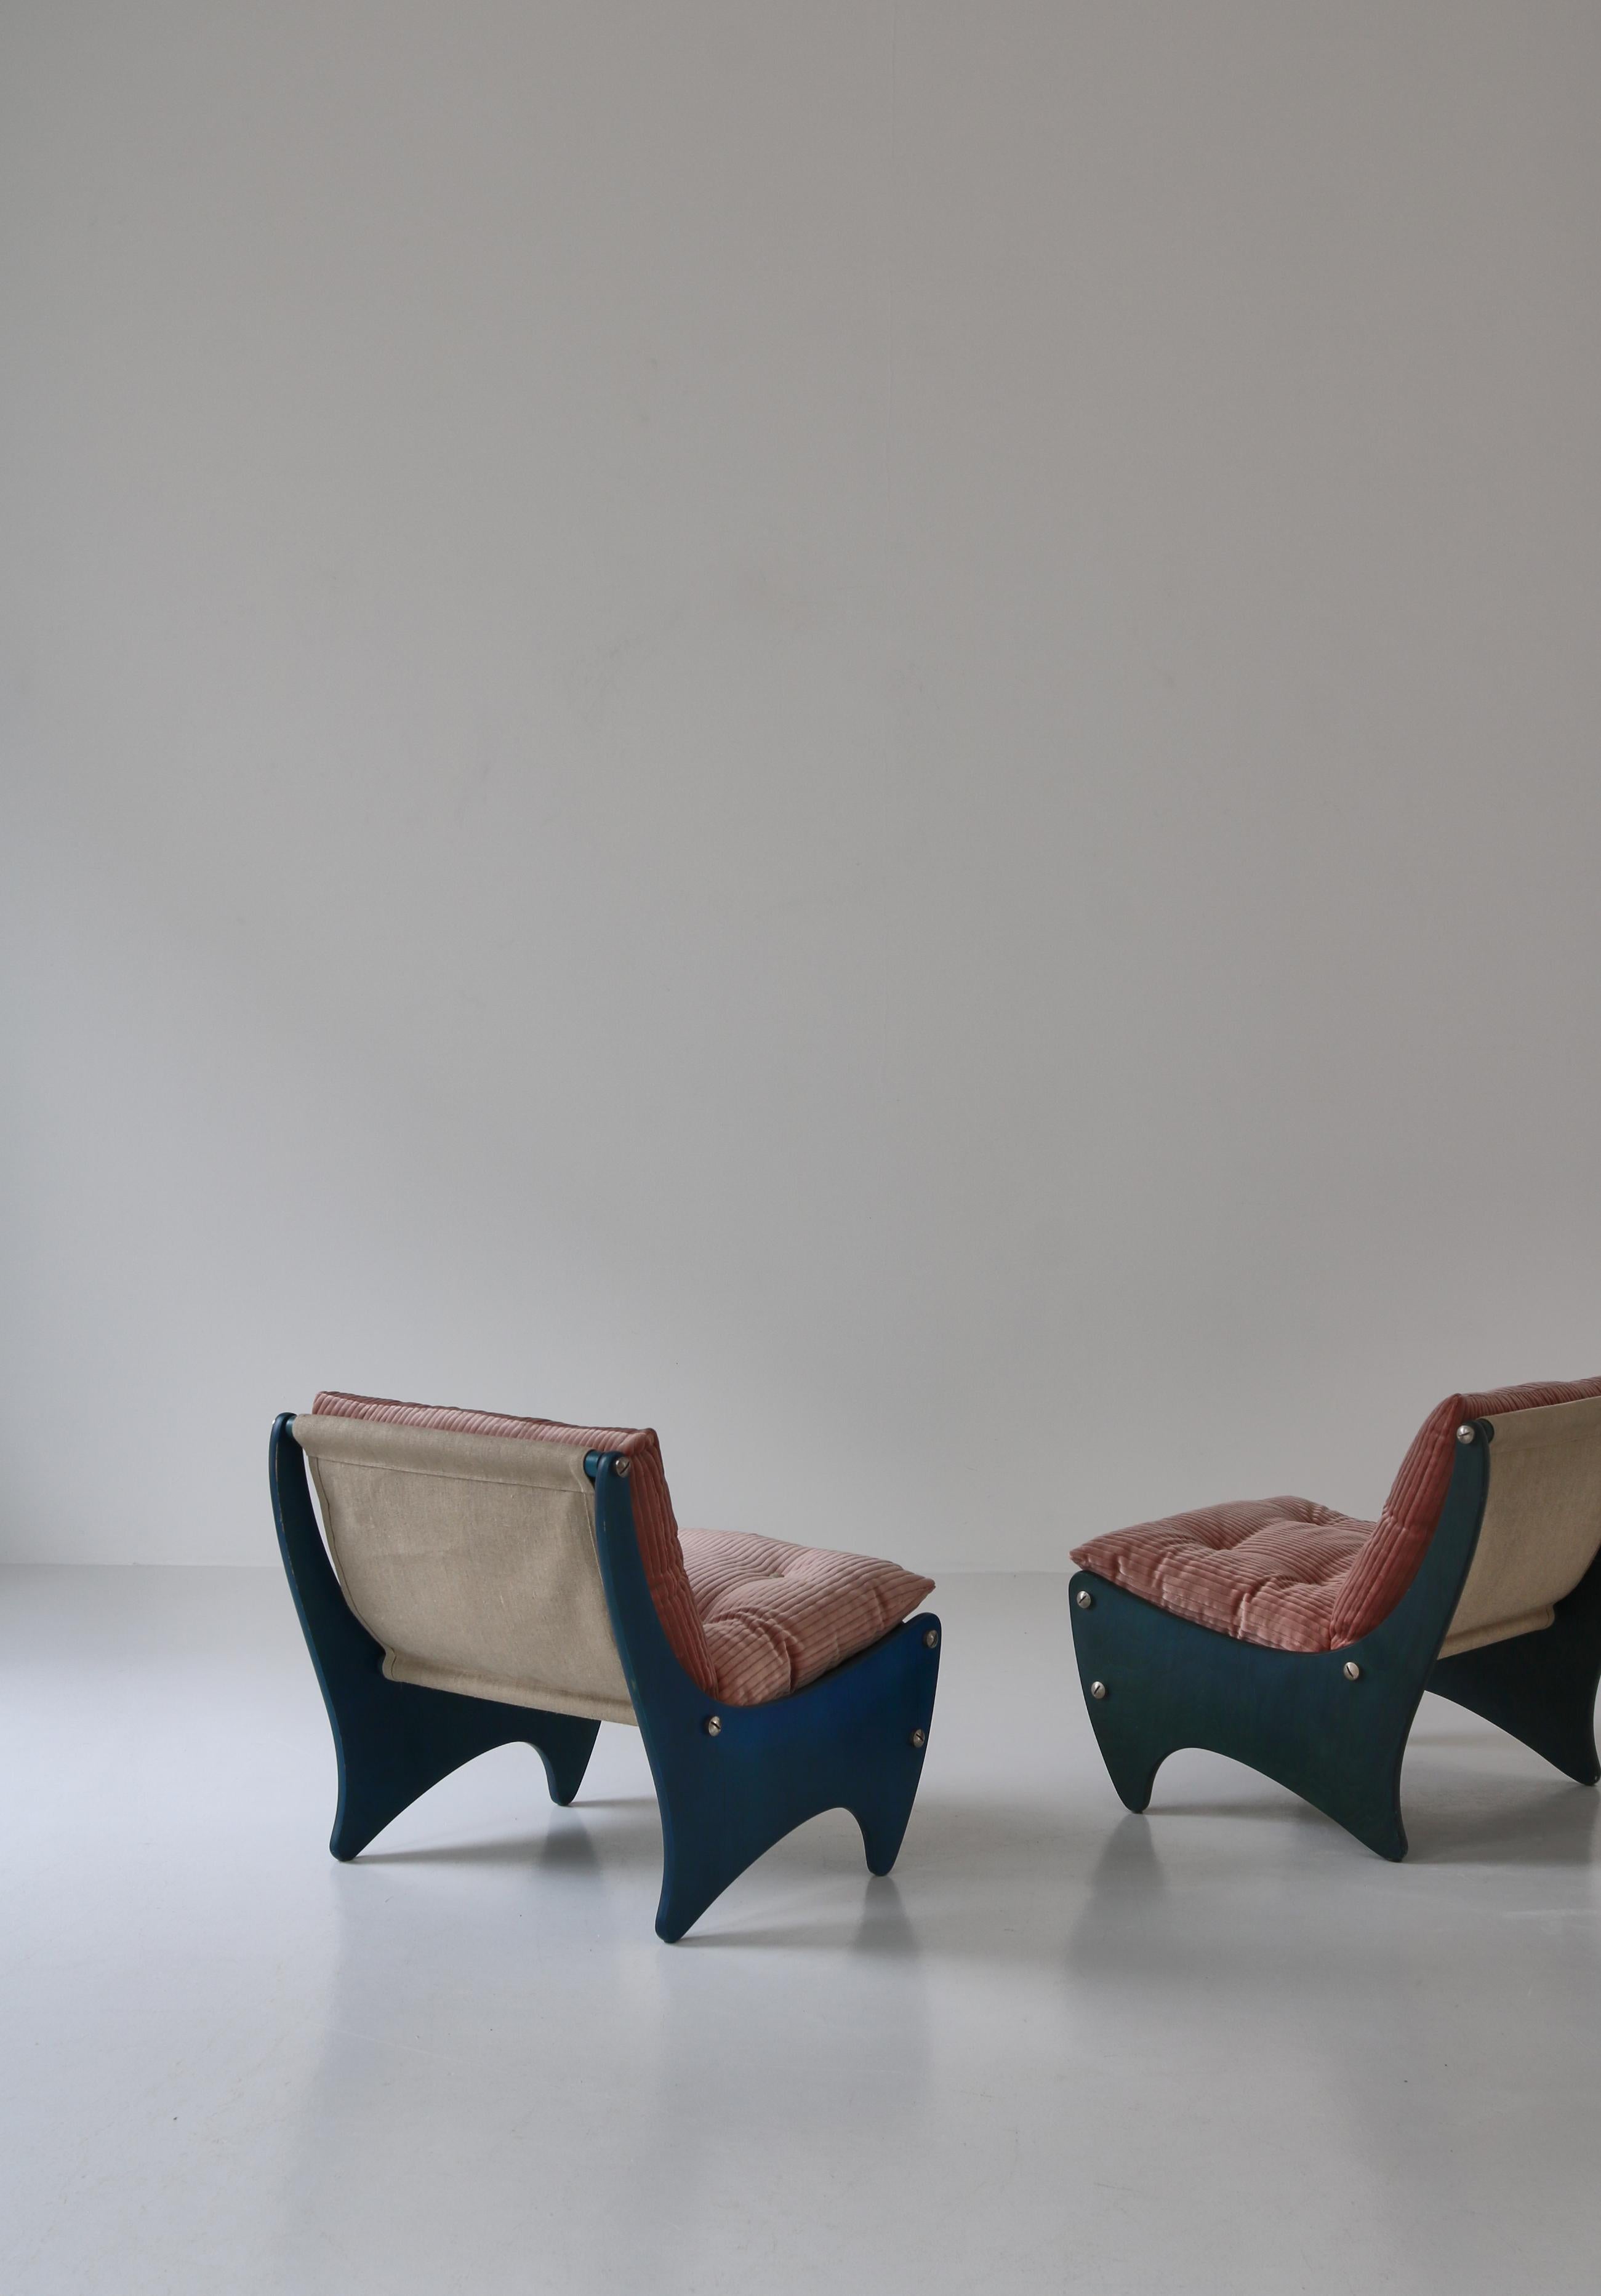 Pair of Scandinavian Modern Lounge Chairs Canvas & Pink Velvet, 1960s For Sale 1